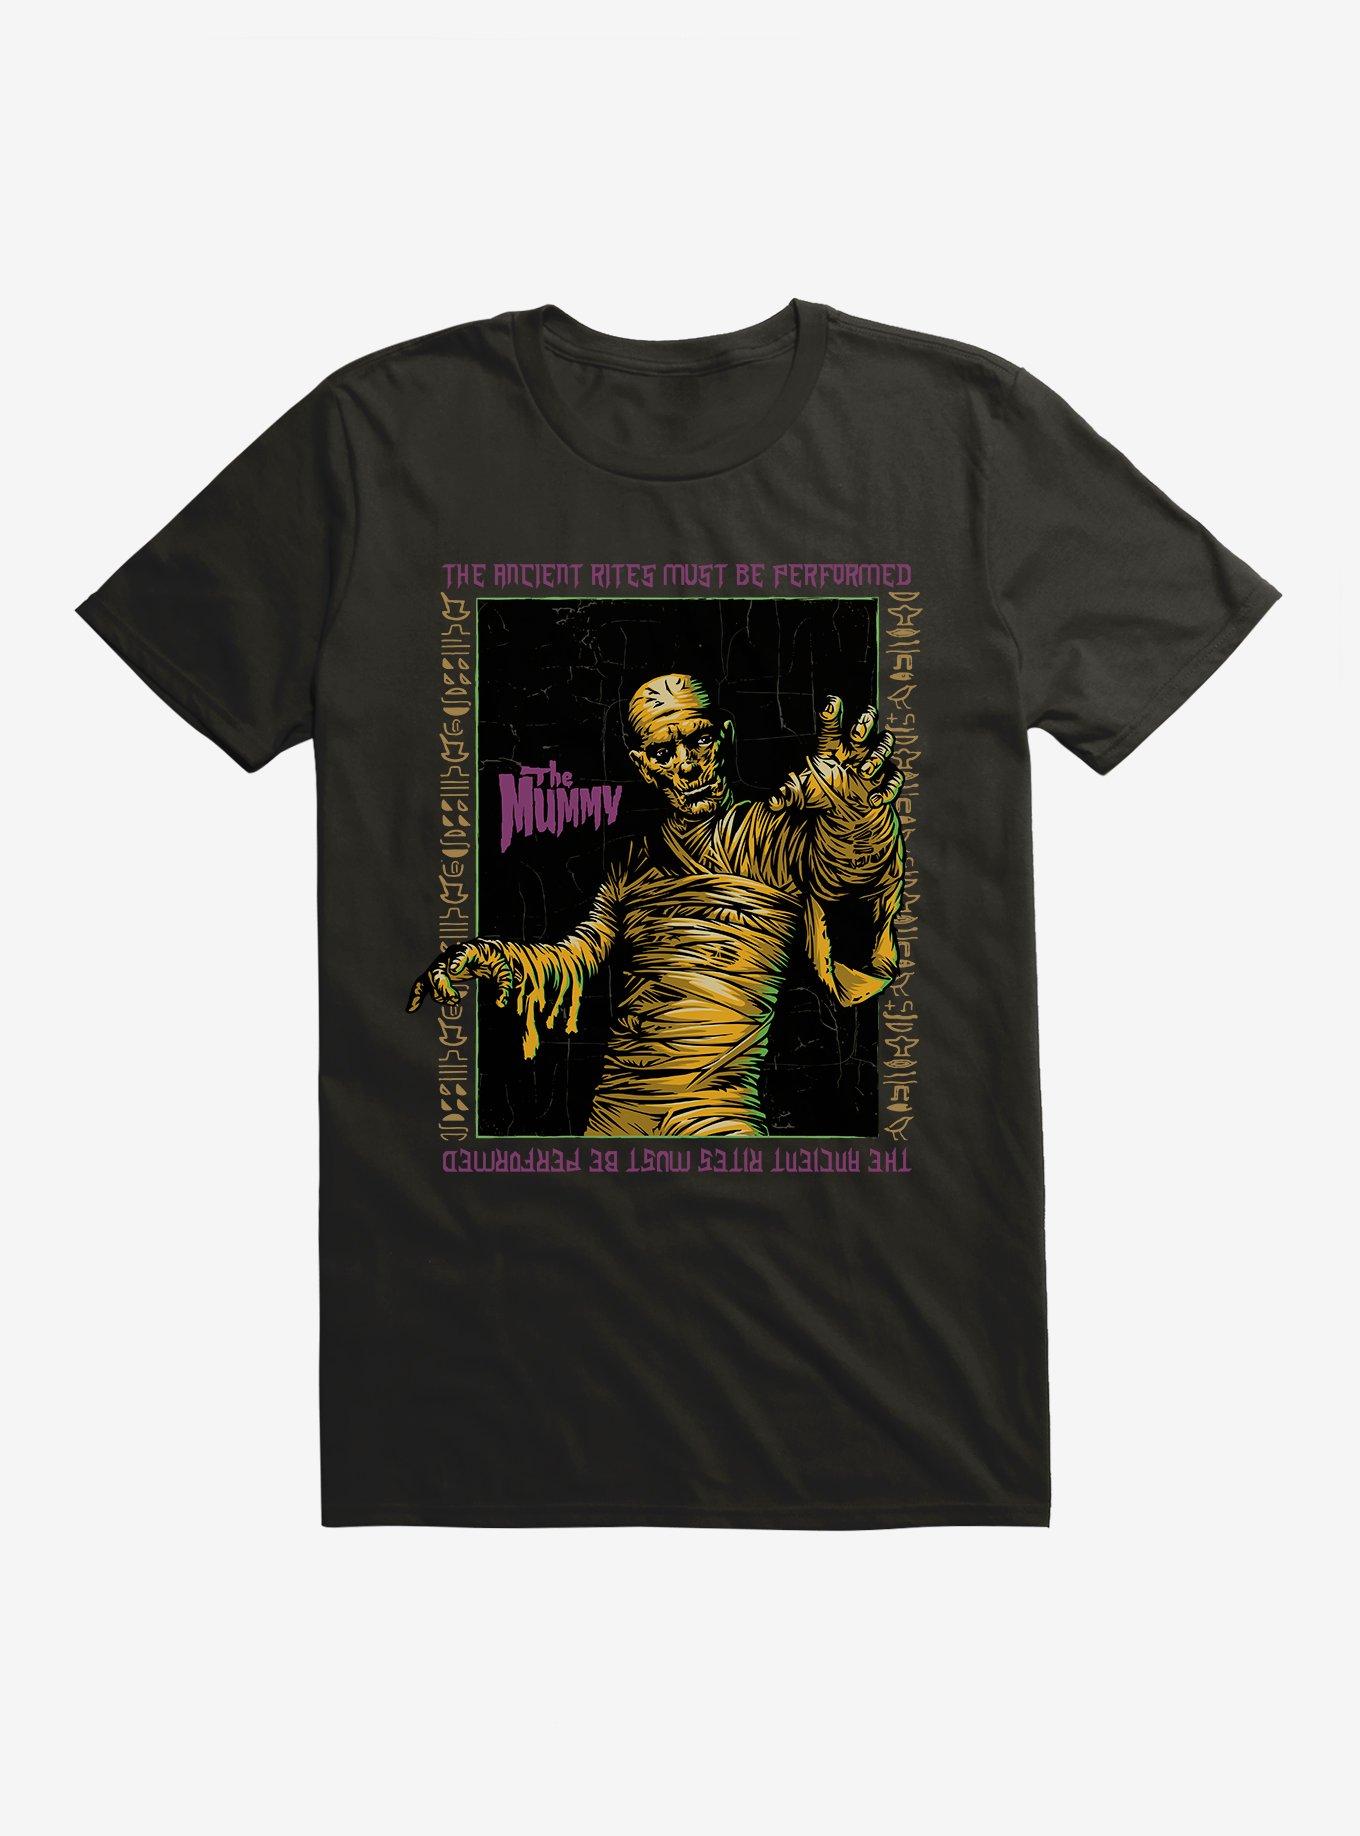 Universal Monsters The Mummy Anncient Rites Must Be Performed T-Shirt, BLACK, hi-res